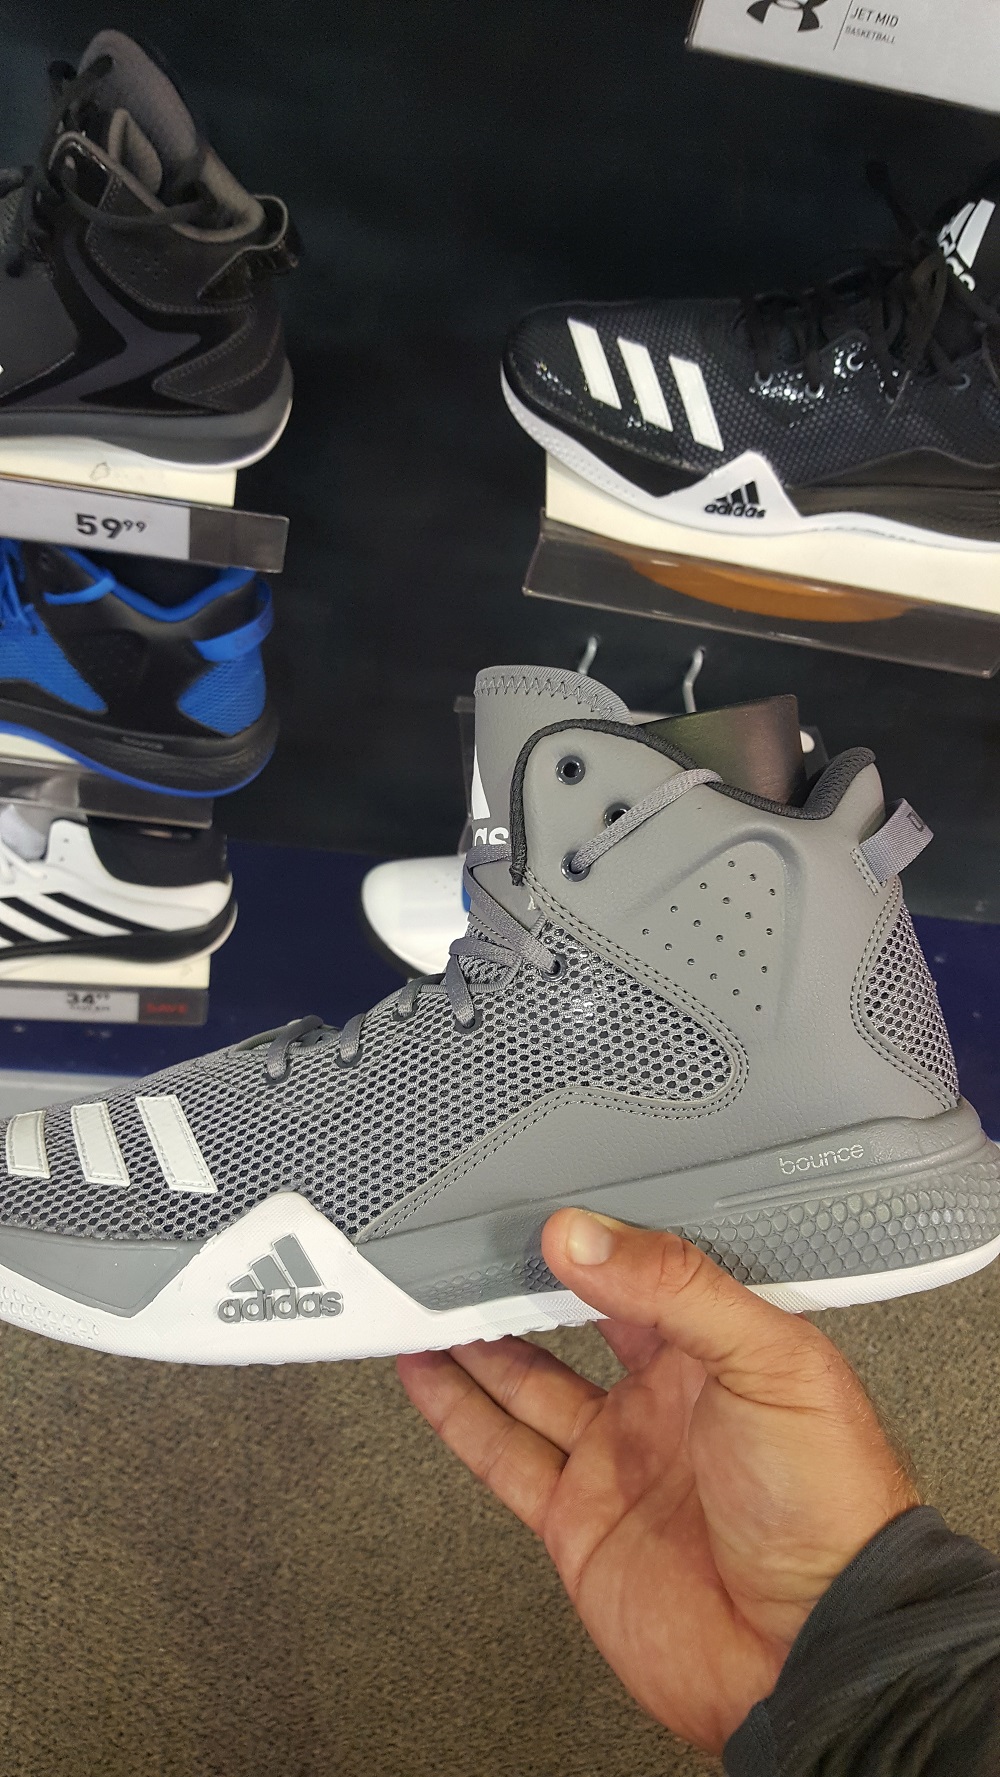 NEW Mens Addidas Dual Threat Basketball Shoes Choose Your Size and Color! 